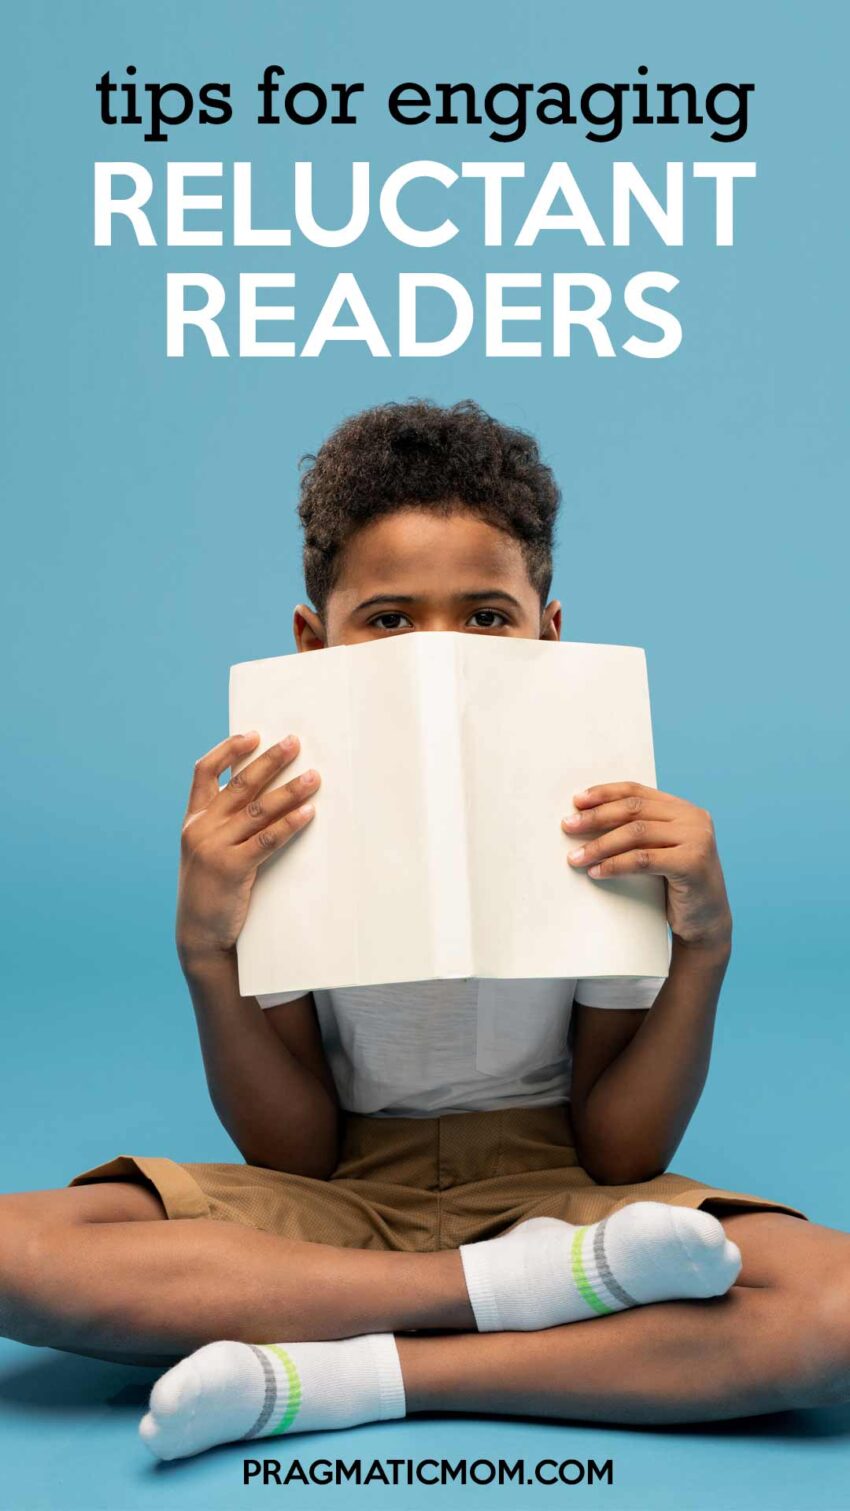 Tips for Engaging Reluctant Readers